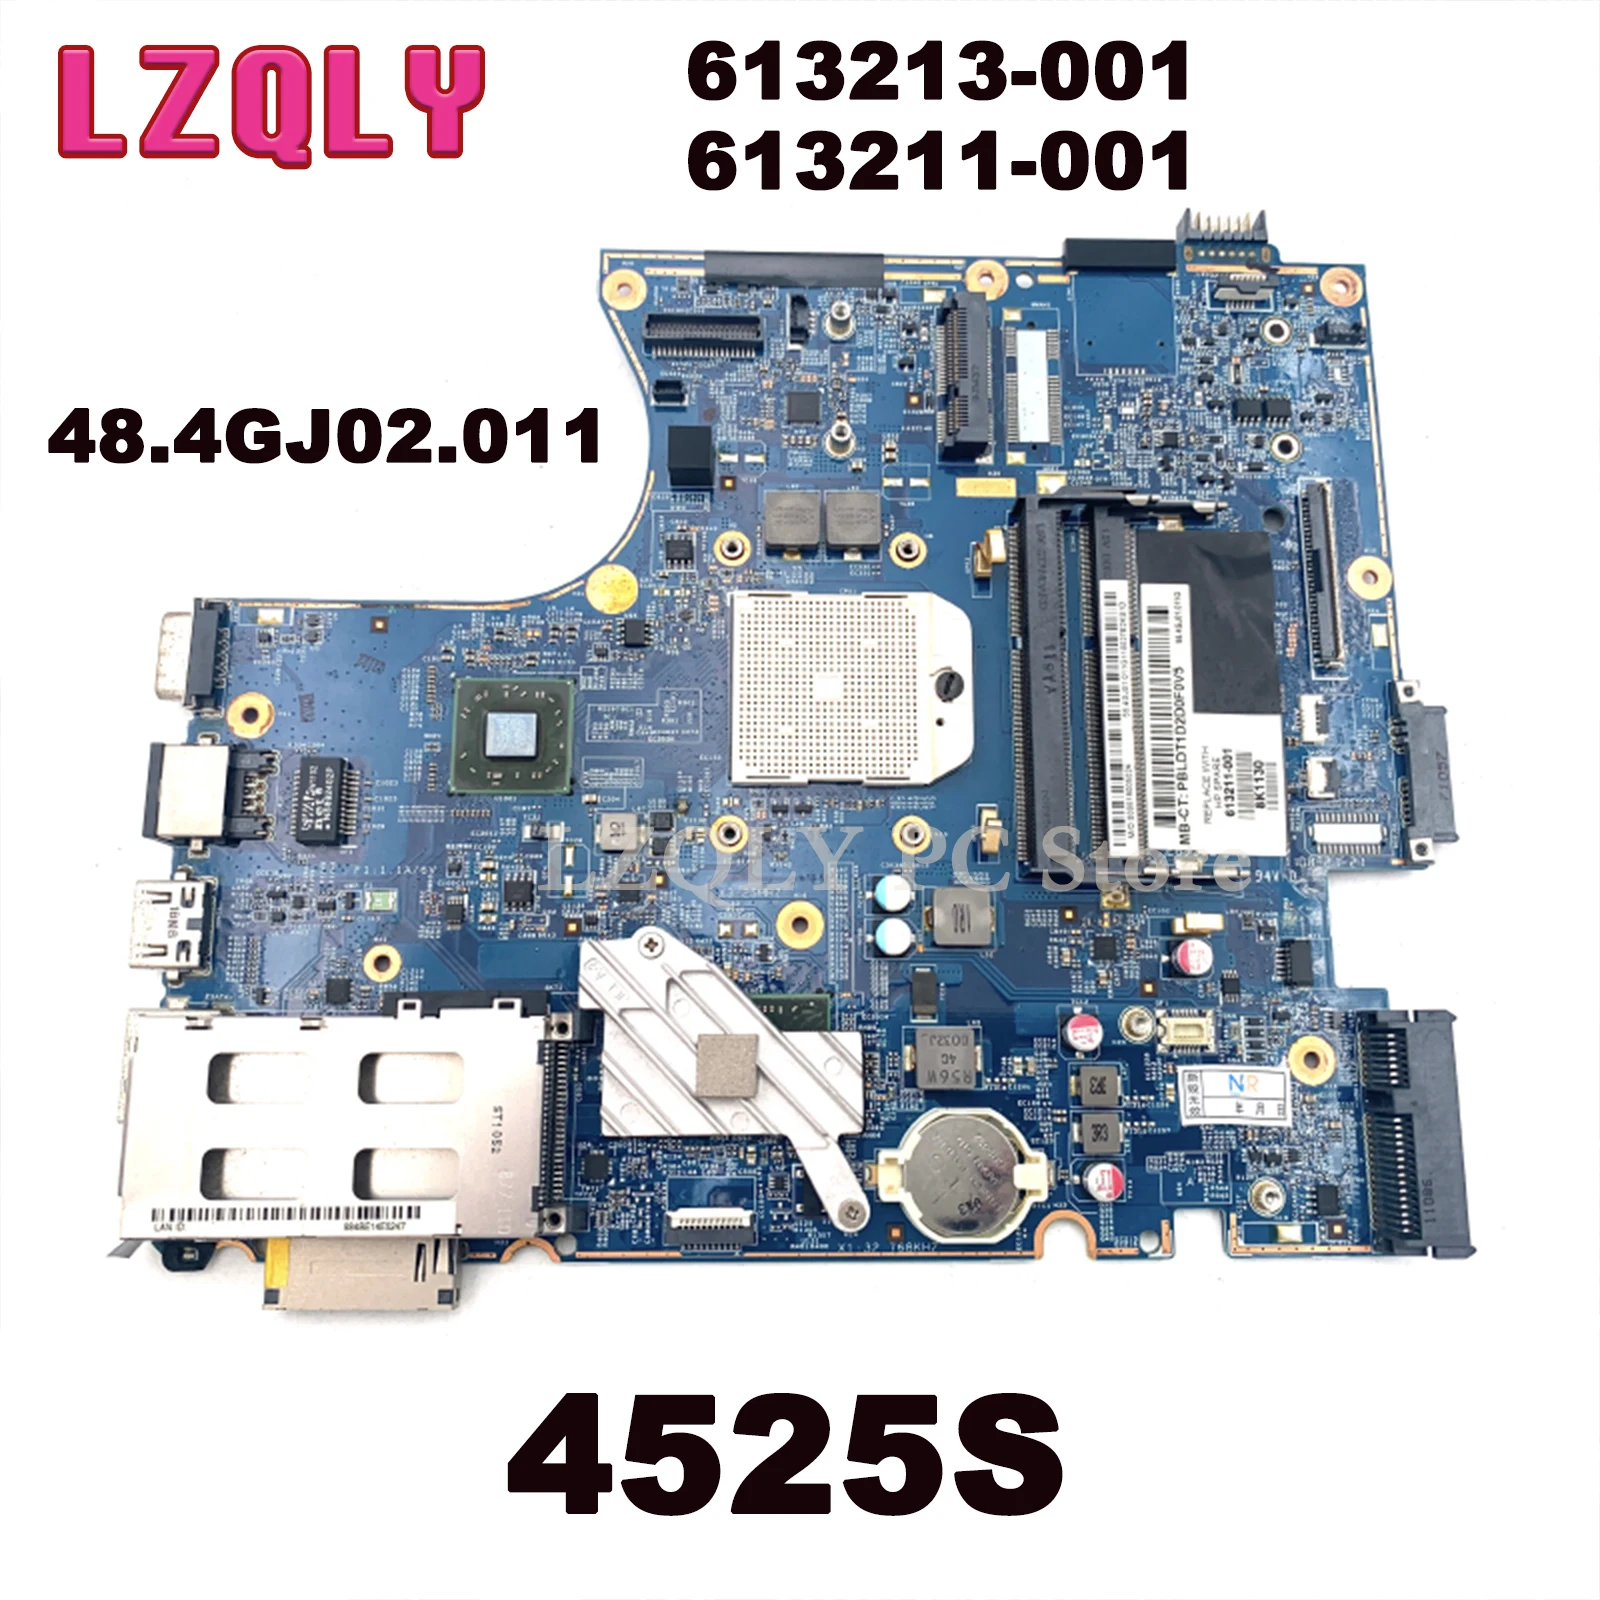 

LZQLY For HP Probook 4525S 48.4GJ02.011 613213-001 613211-001 Laptop Motherboard Socket S1 DDR3 Free CPU